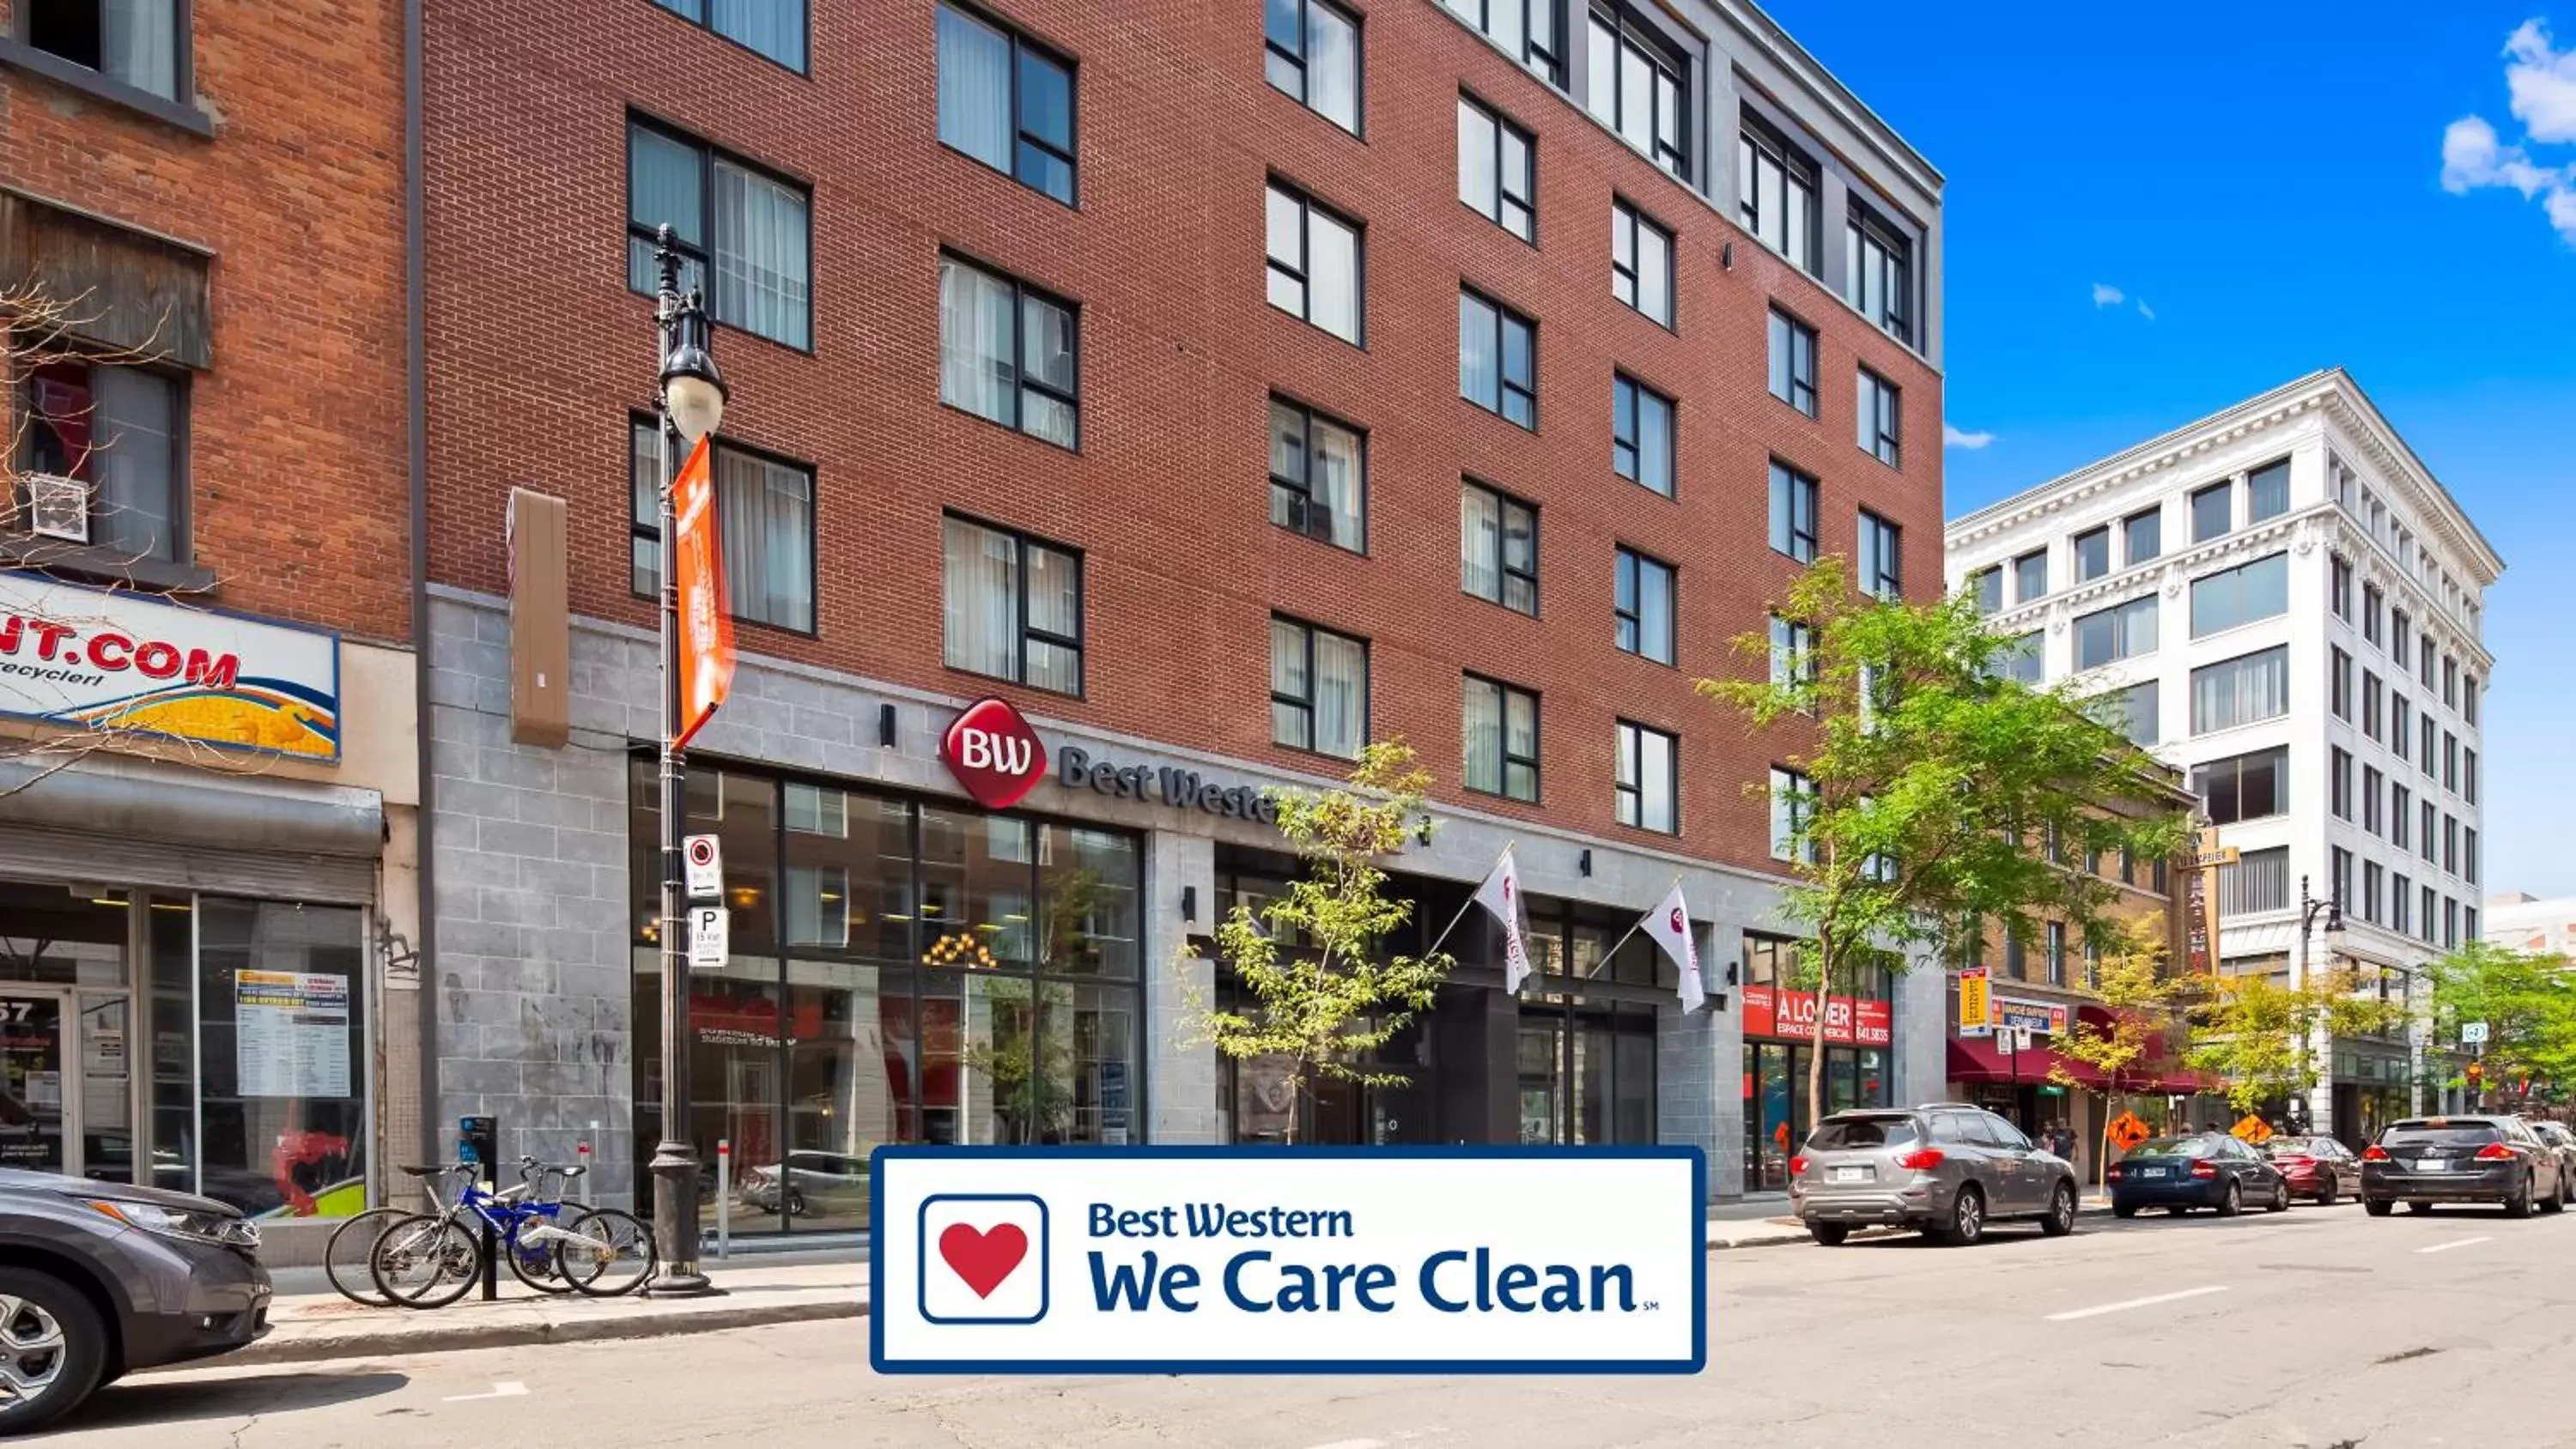 Property Building in Best Western Plus Hotel Montreal